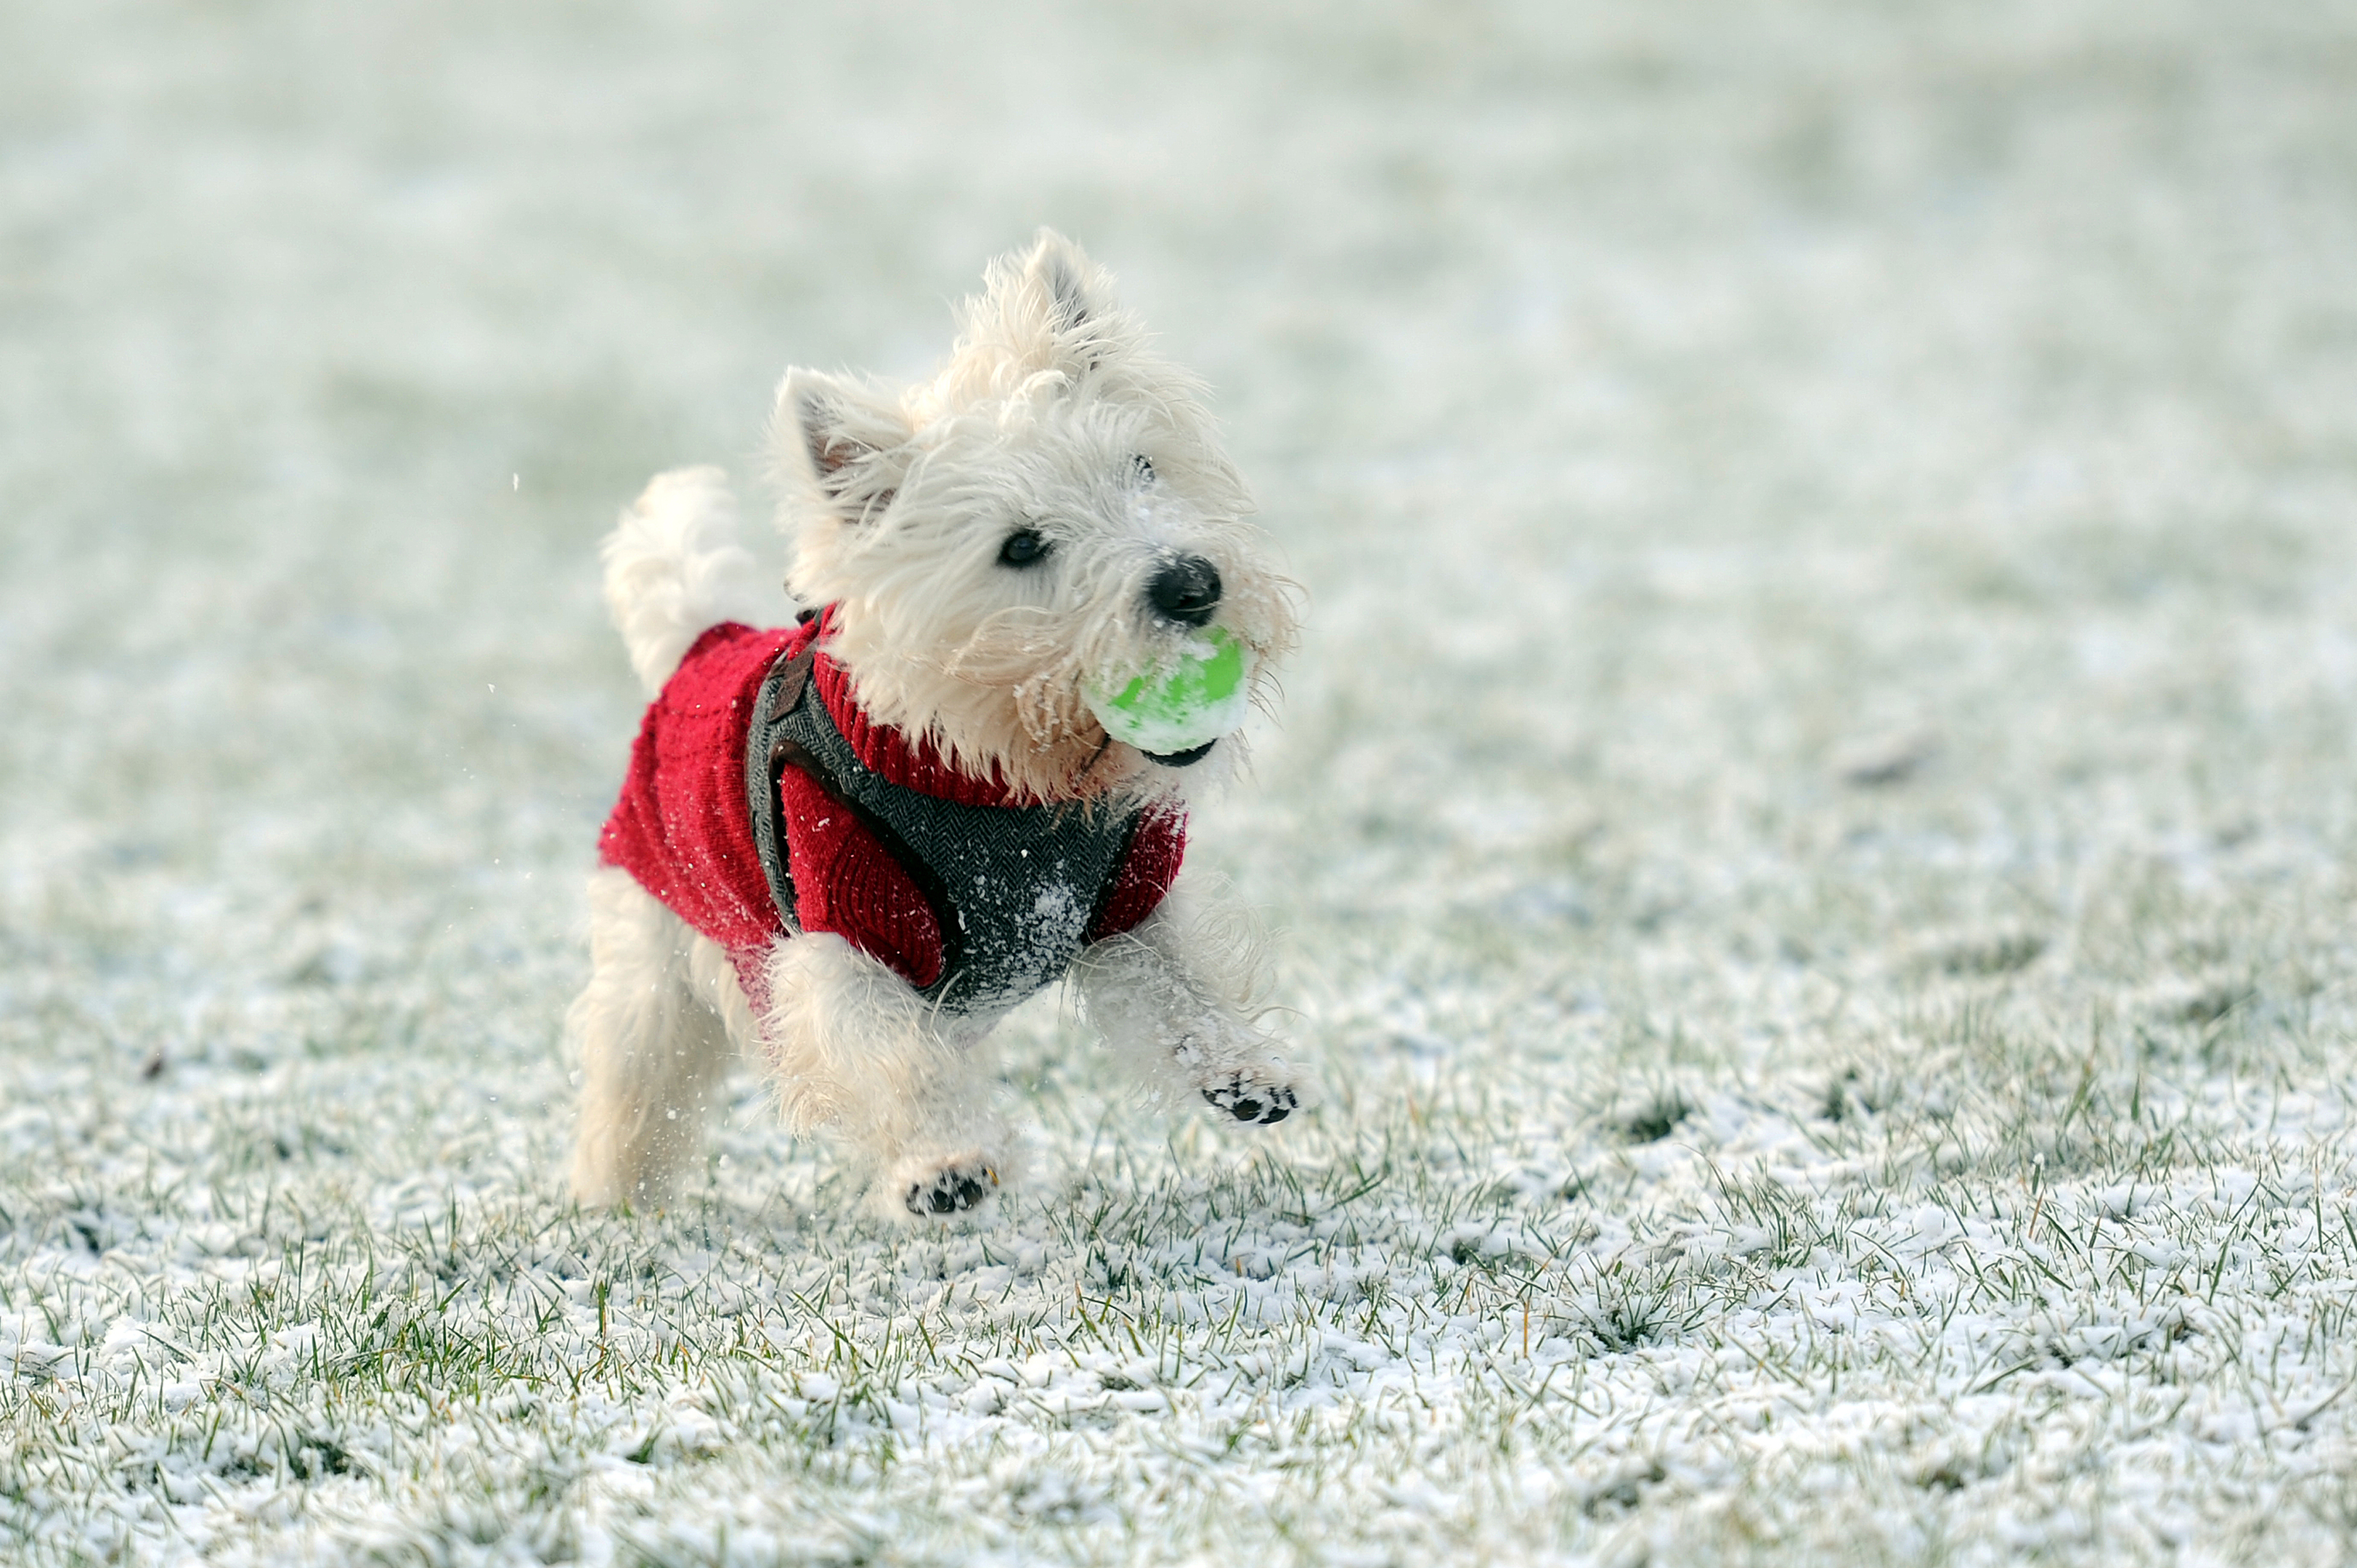 Rupert a two-year-old Westie may have enjoyed chasing his ball in the snow - but it's been treacherous for most motorists recently.